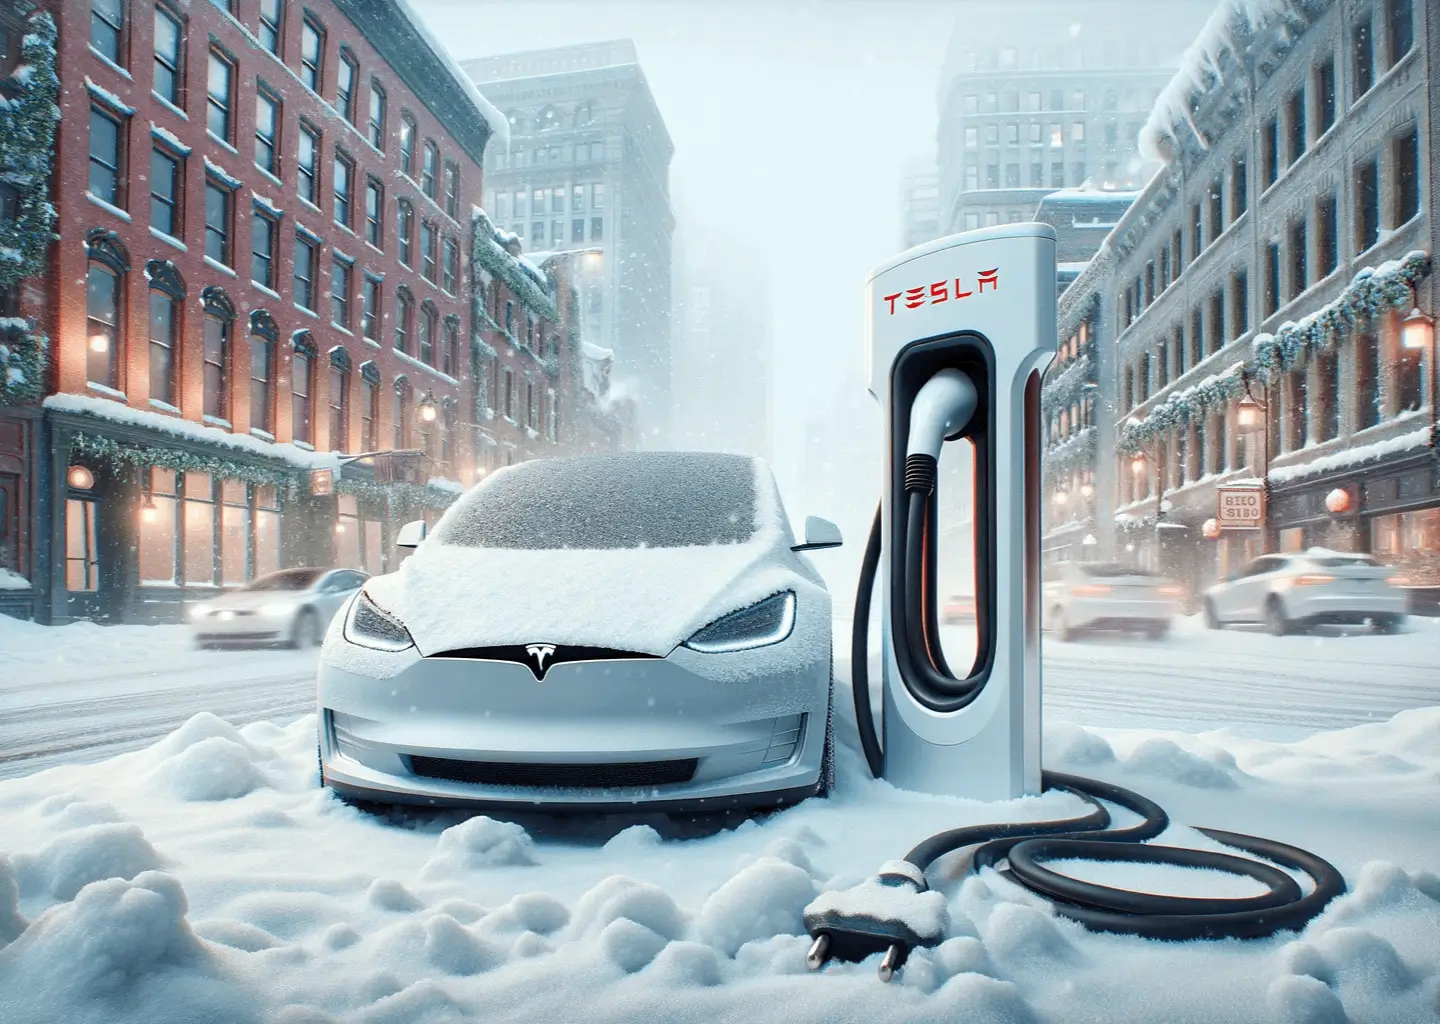 Tesla EV charging plug in a snowy urban setting, showcasing cold weather charging solutions in a city environment.